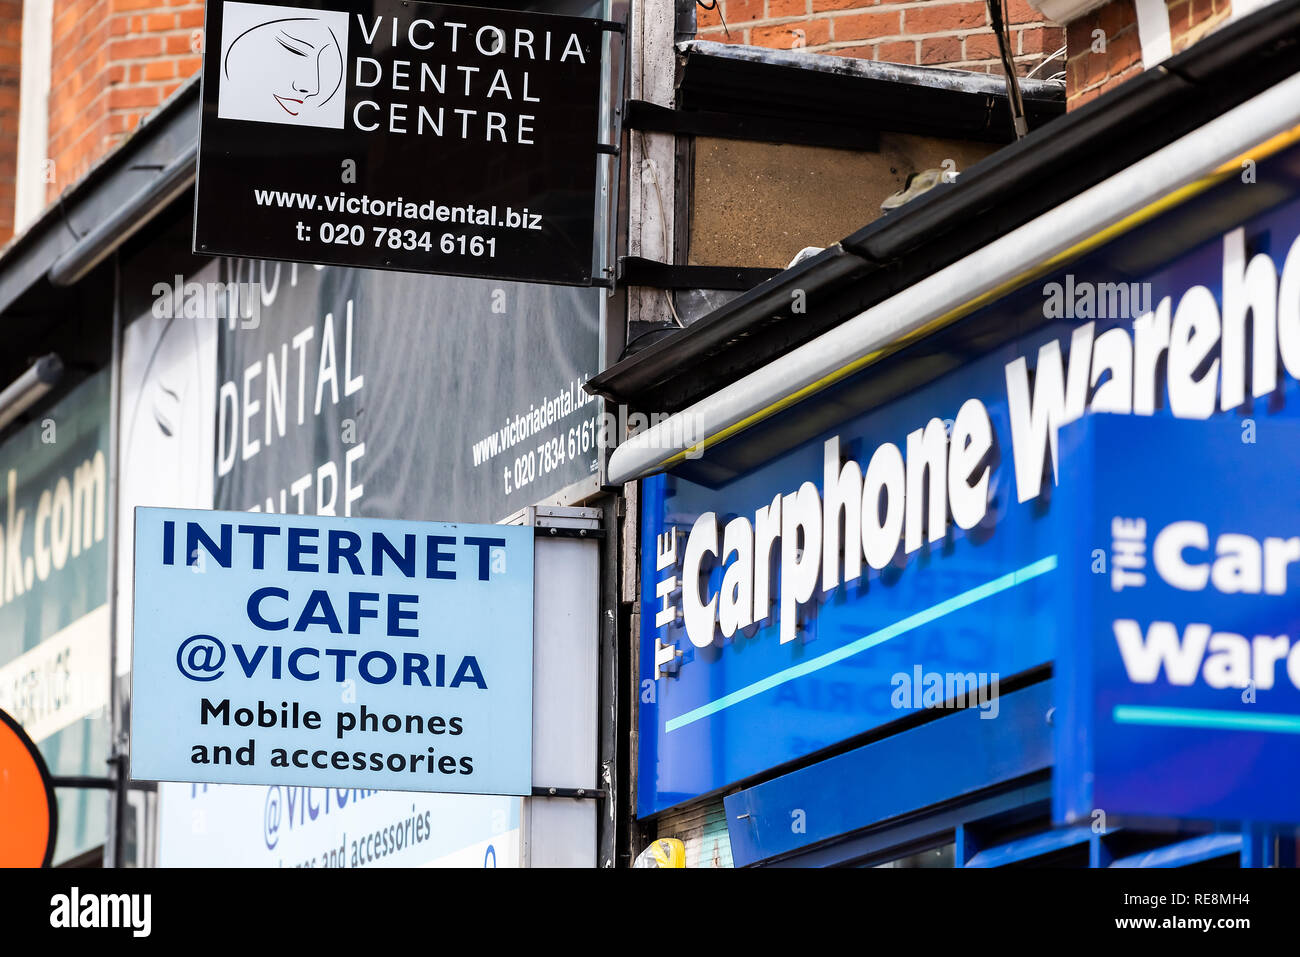 London, UK - June 21, 2018: Neighborhood district of Victoria closeup of signs for Internet Cafe, Dental Care and phone warehouse stores, shops Stock Photo